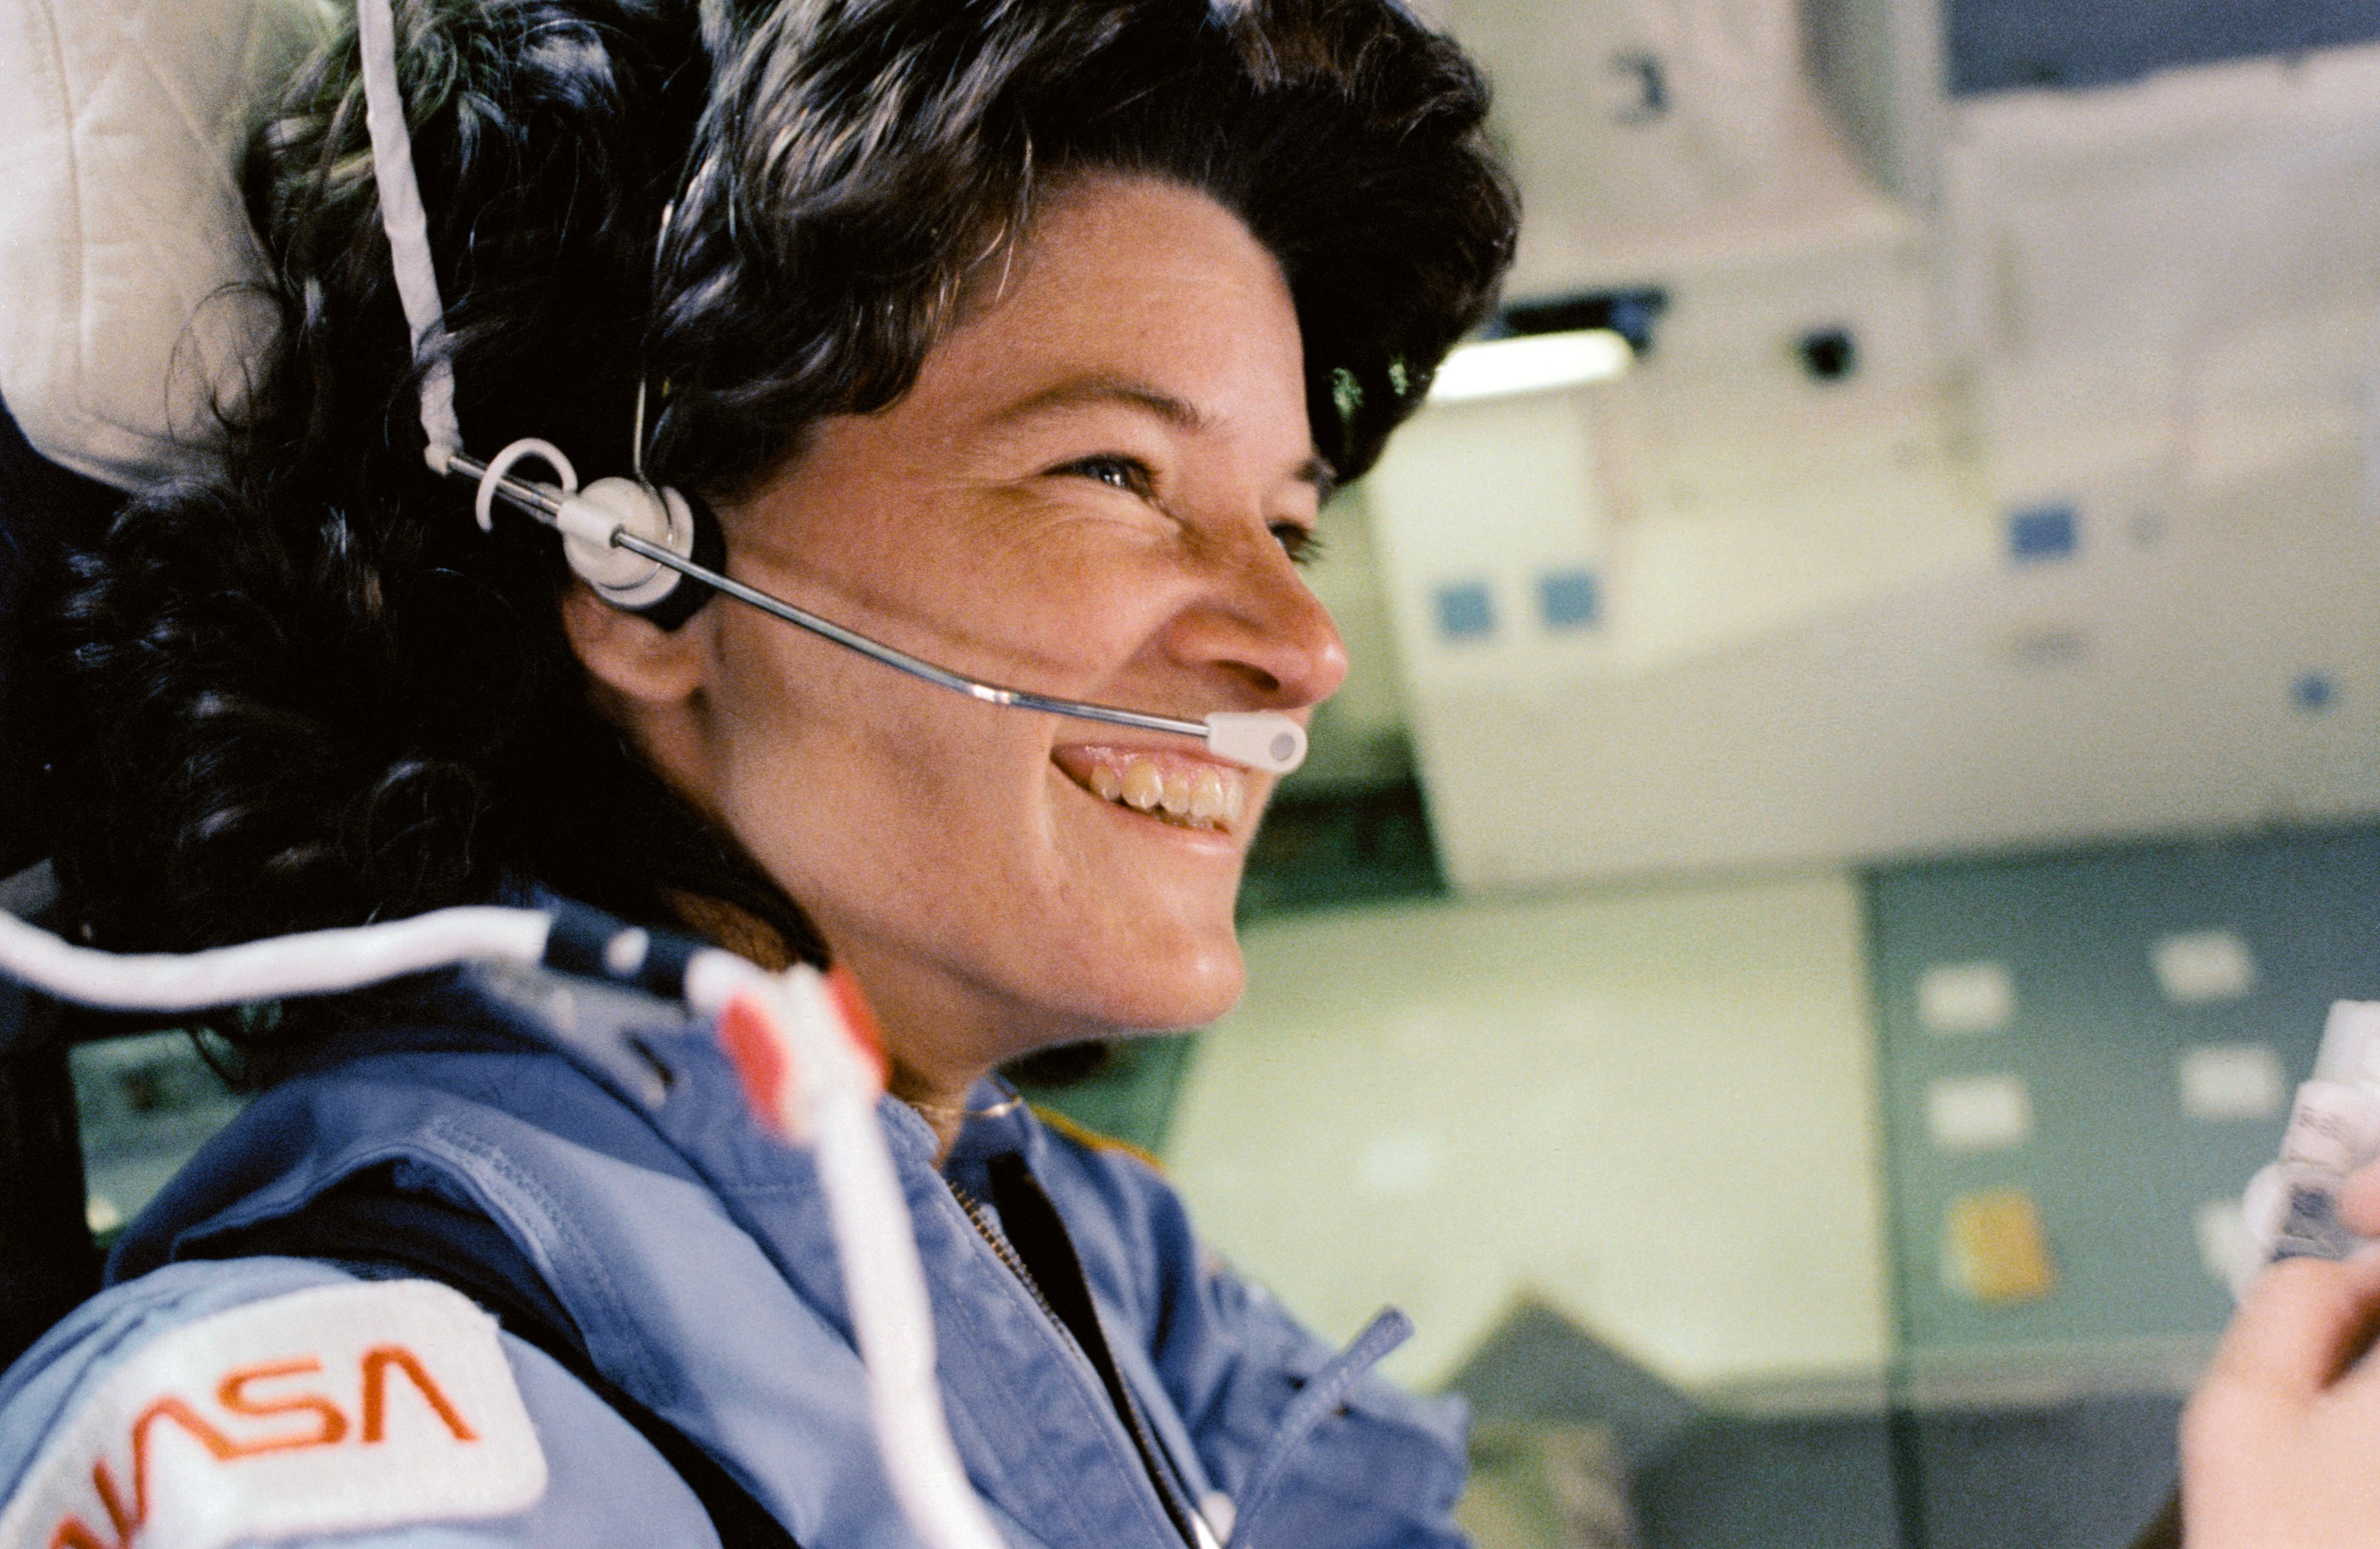 Tributes Mount As Sally Ride’s 30th Anniversary In Space Approaches2877 x 1872